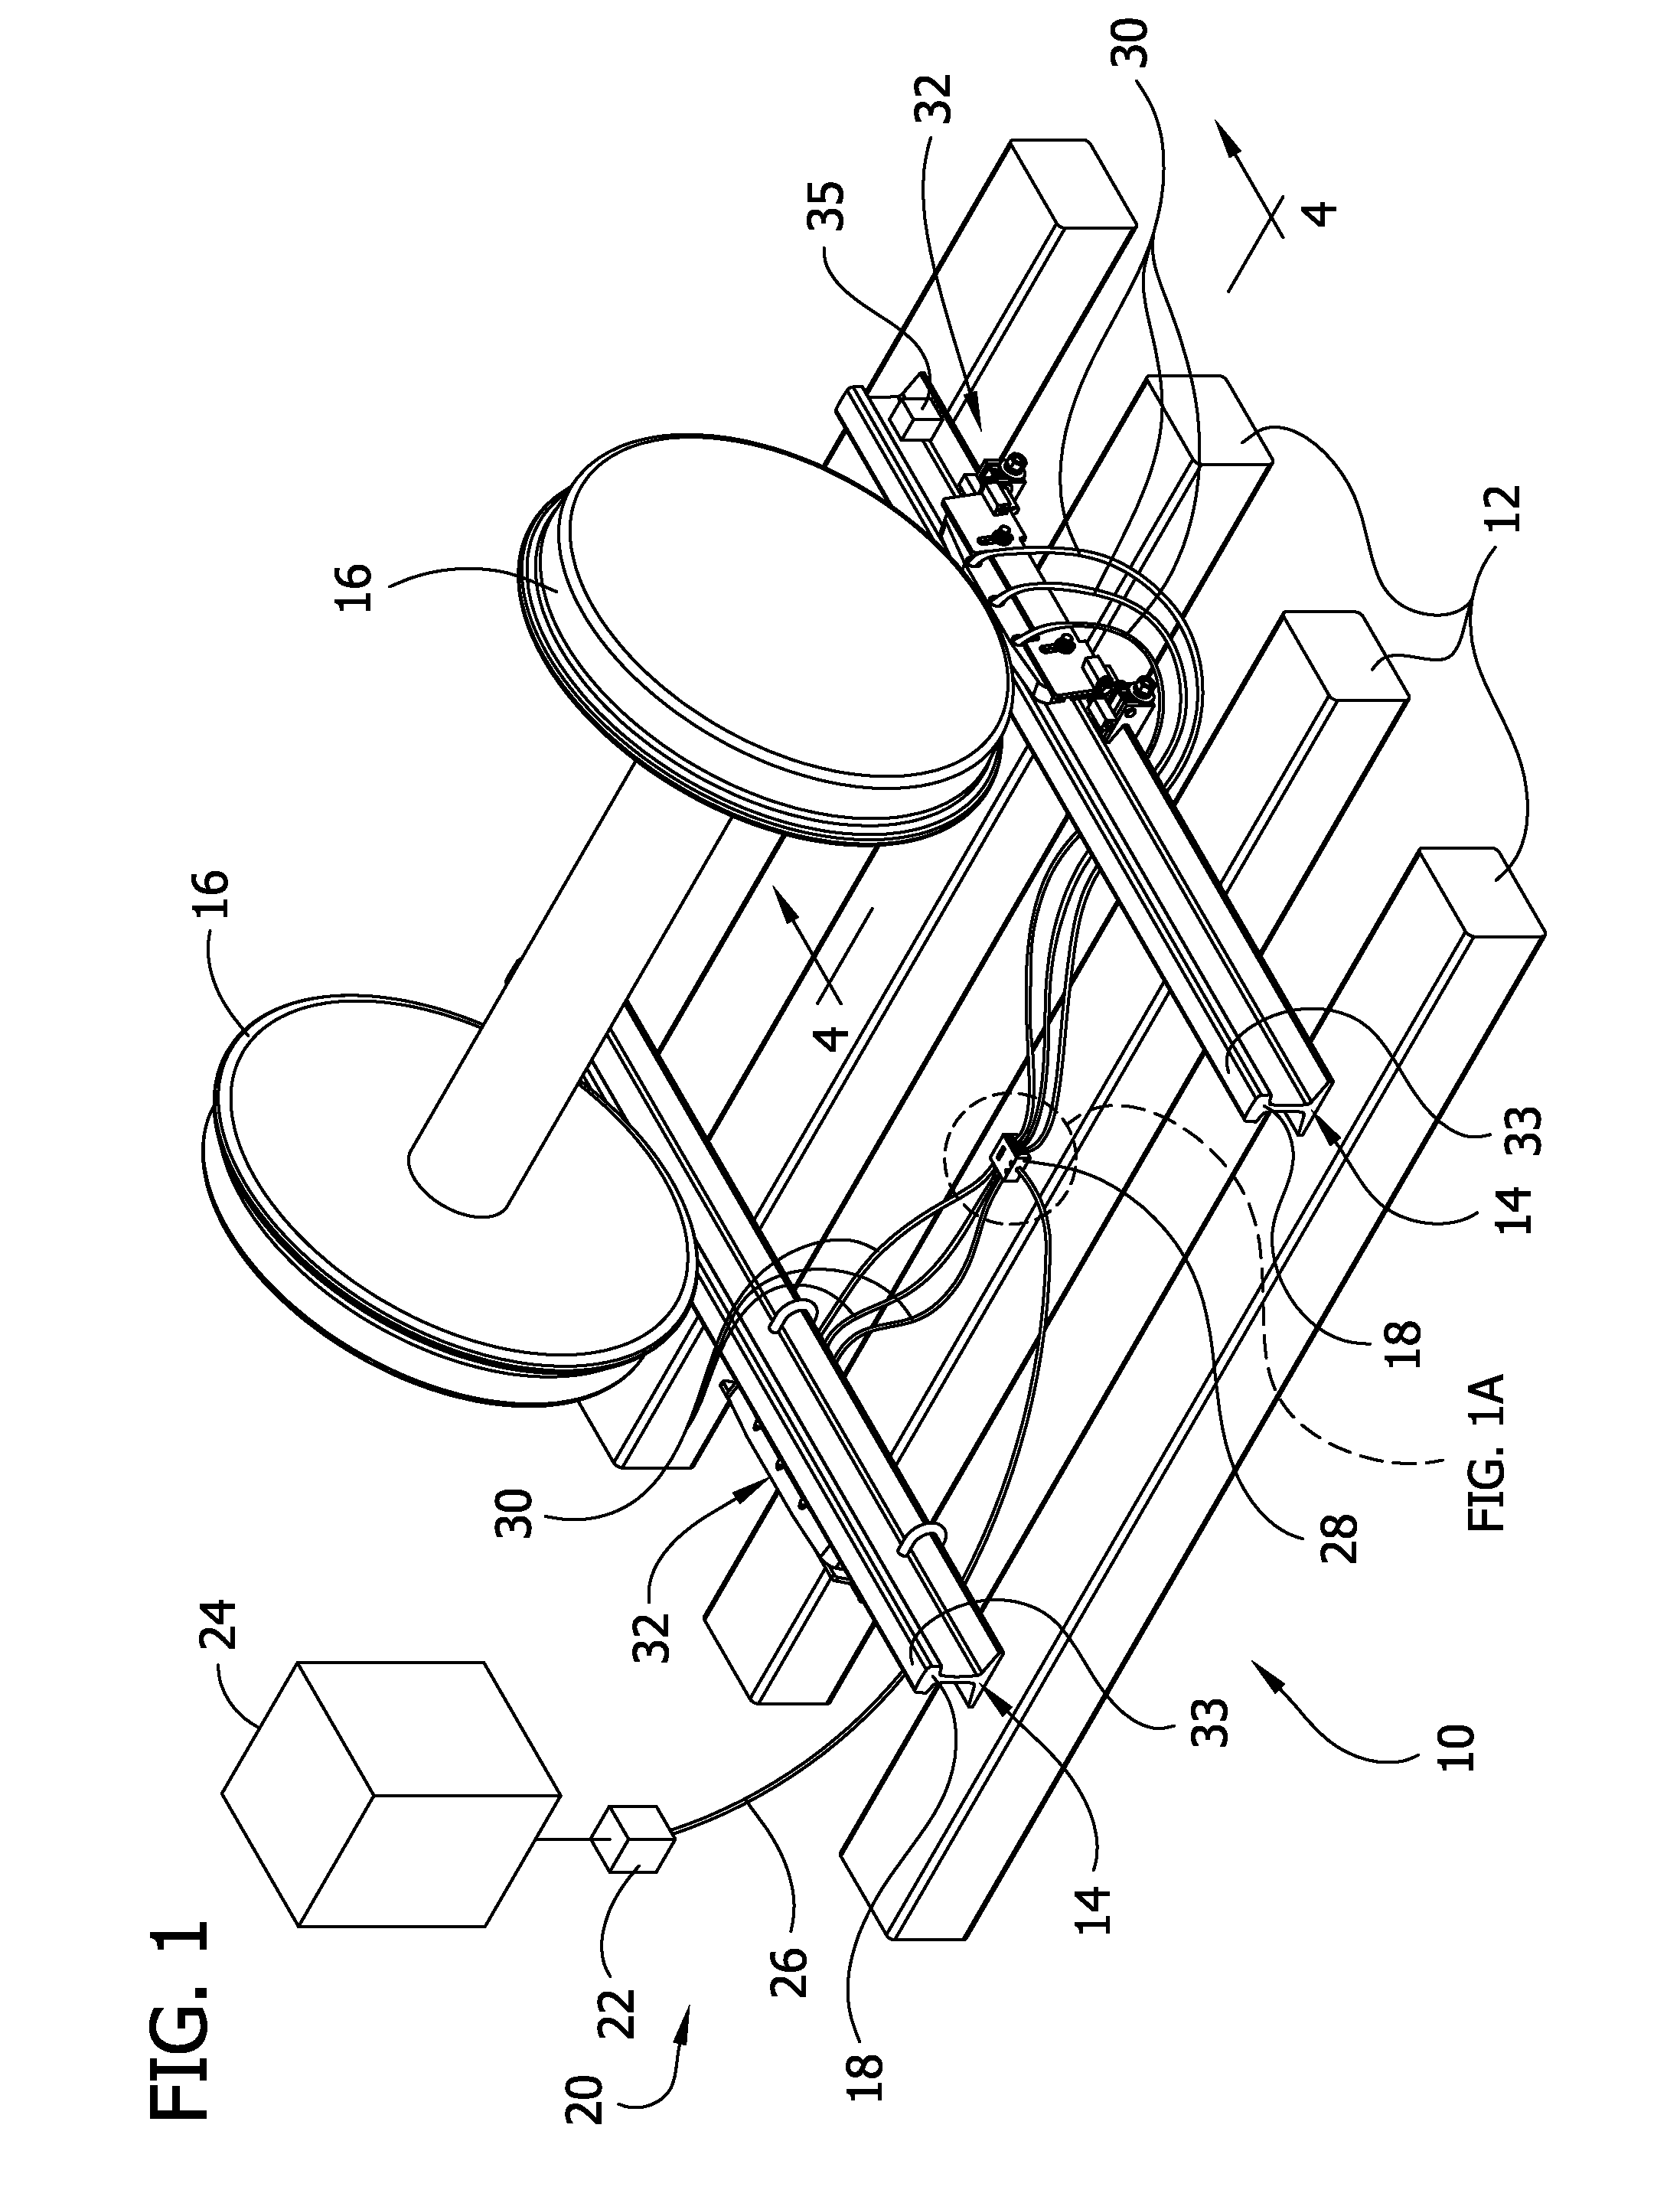 Apparatus for Applying a Pumpable Material to a Rail Head